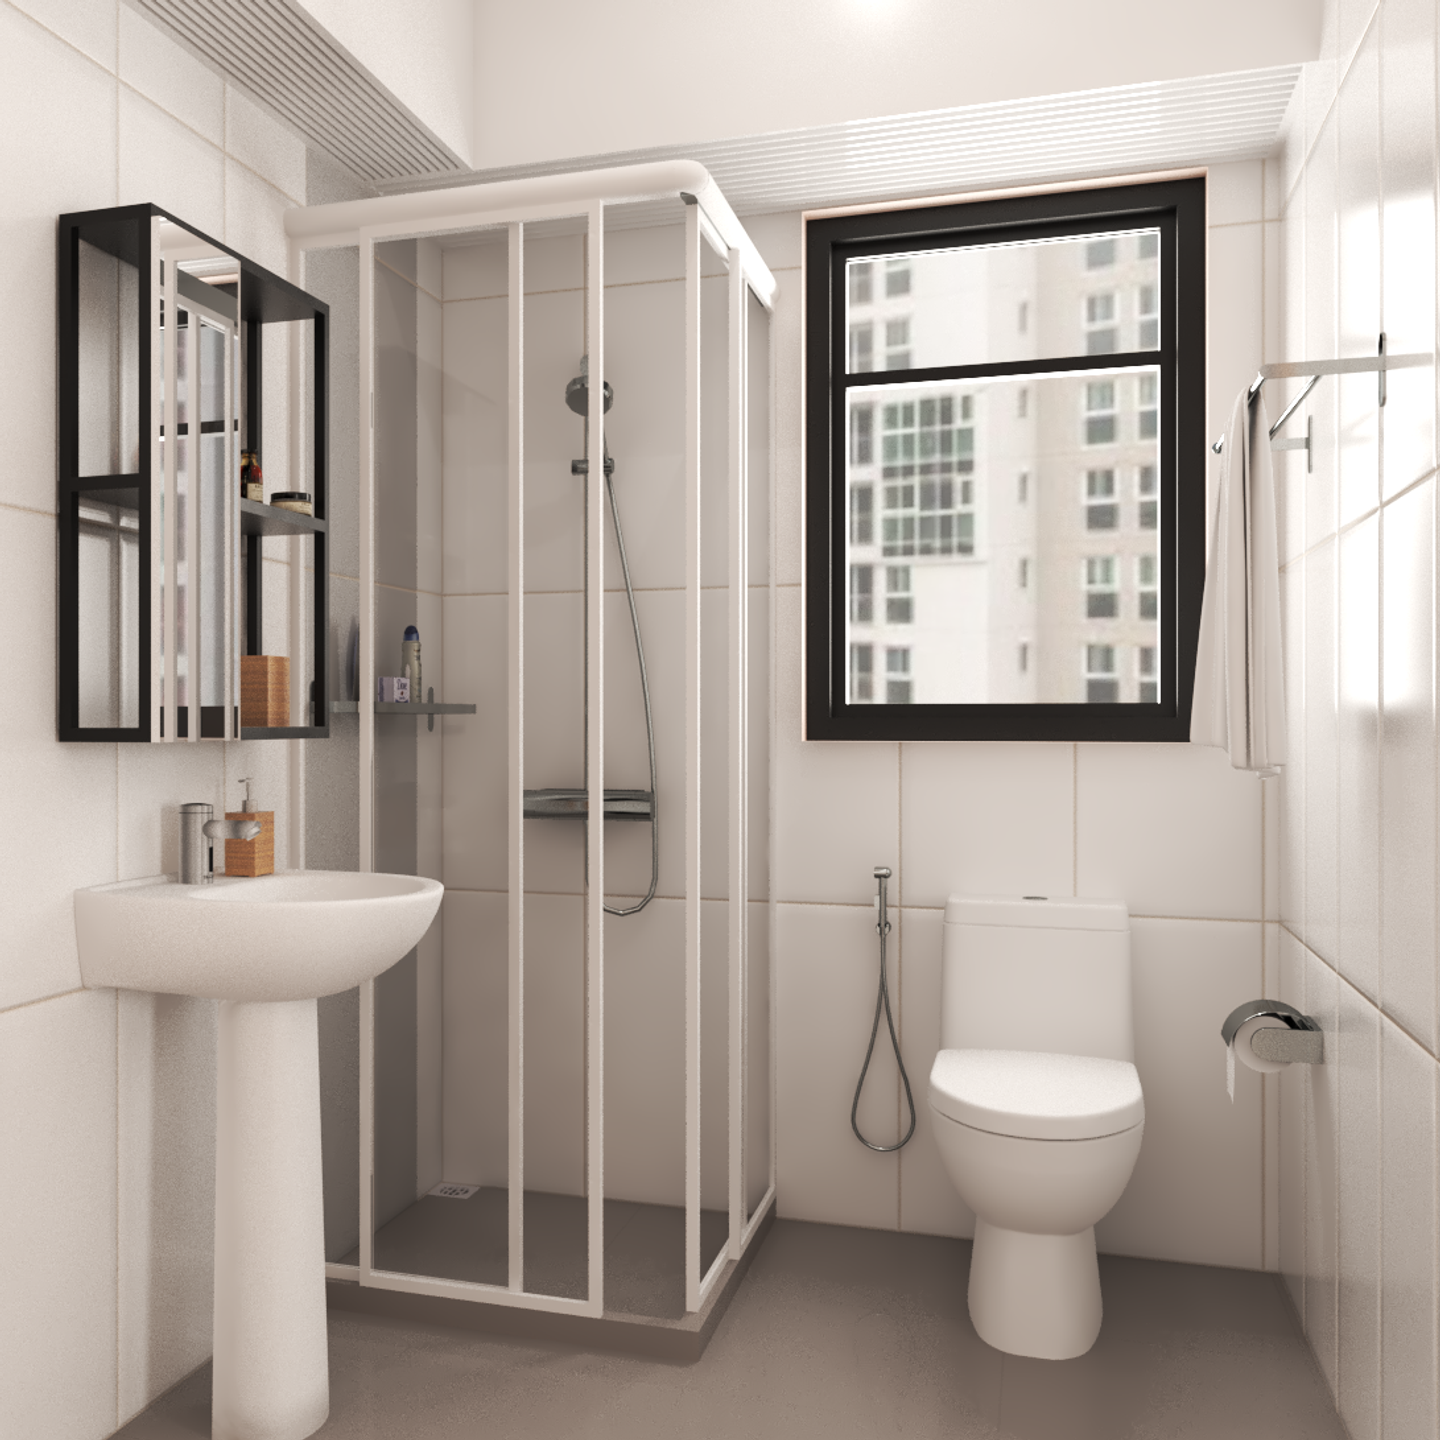 Traditional Compact Toilet Design with White Shower Cubicle - Livspace